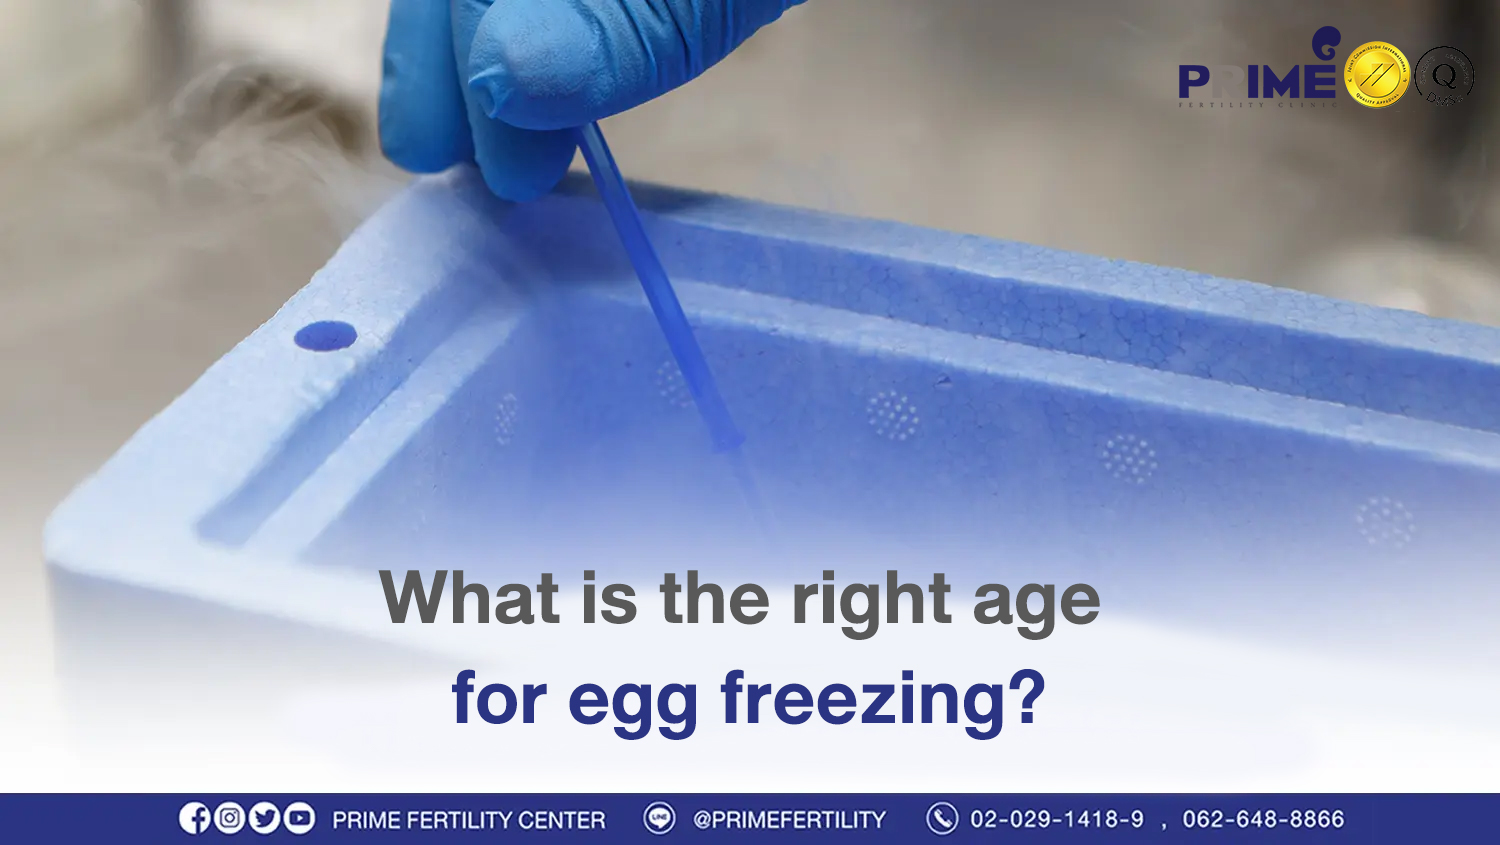 What is the right age for egg freezing?